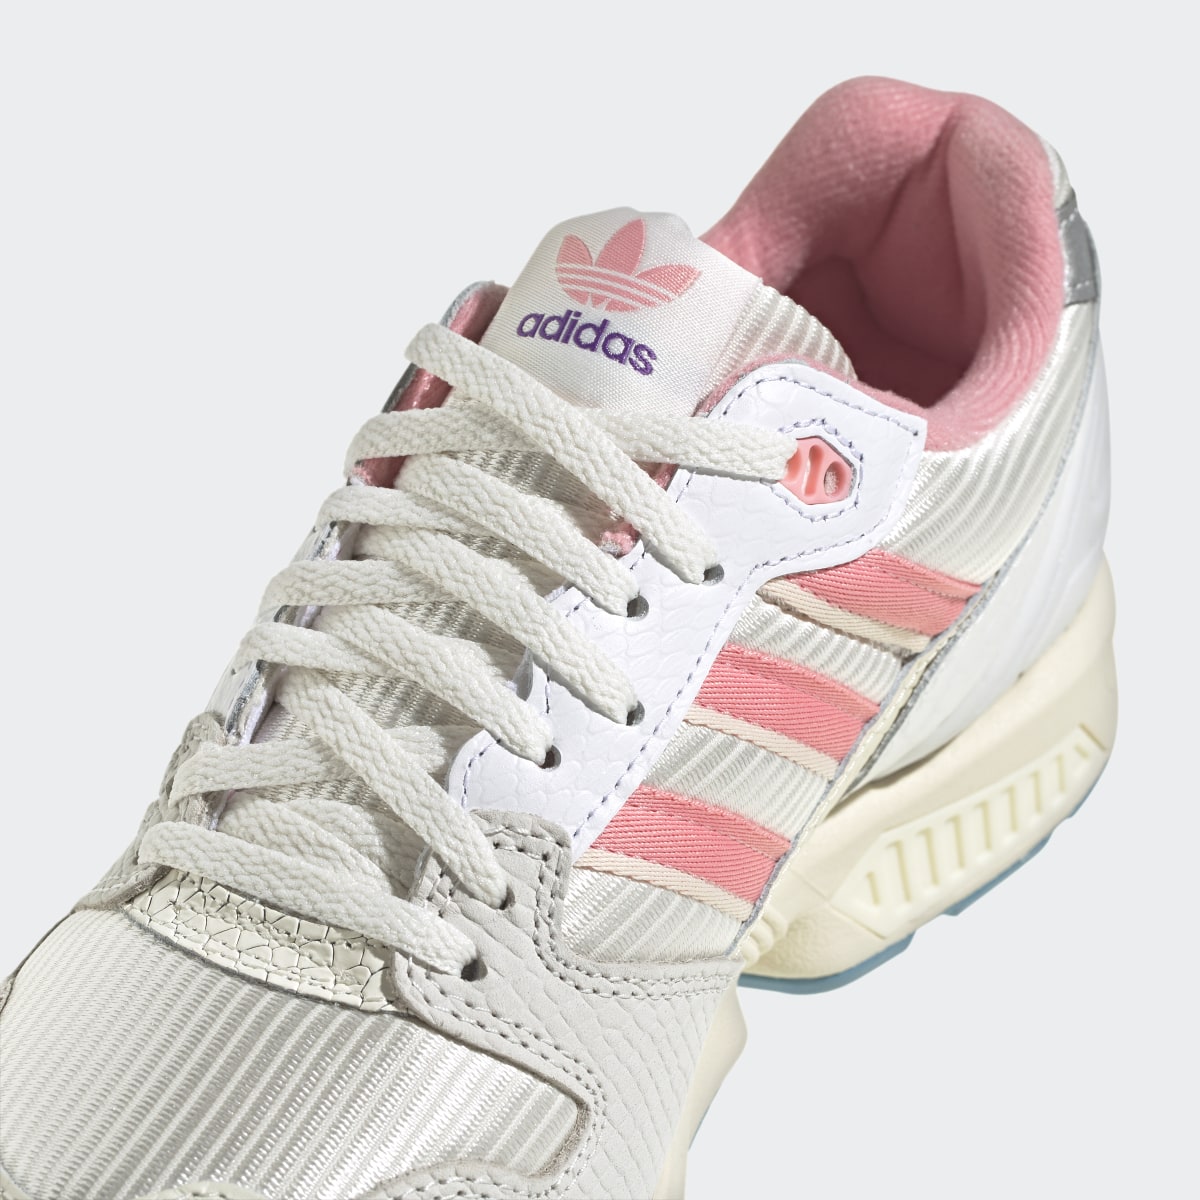 Adidas ZX 5020 Shoes. 10